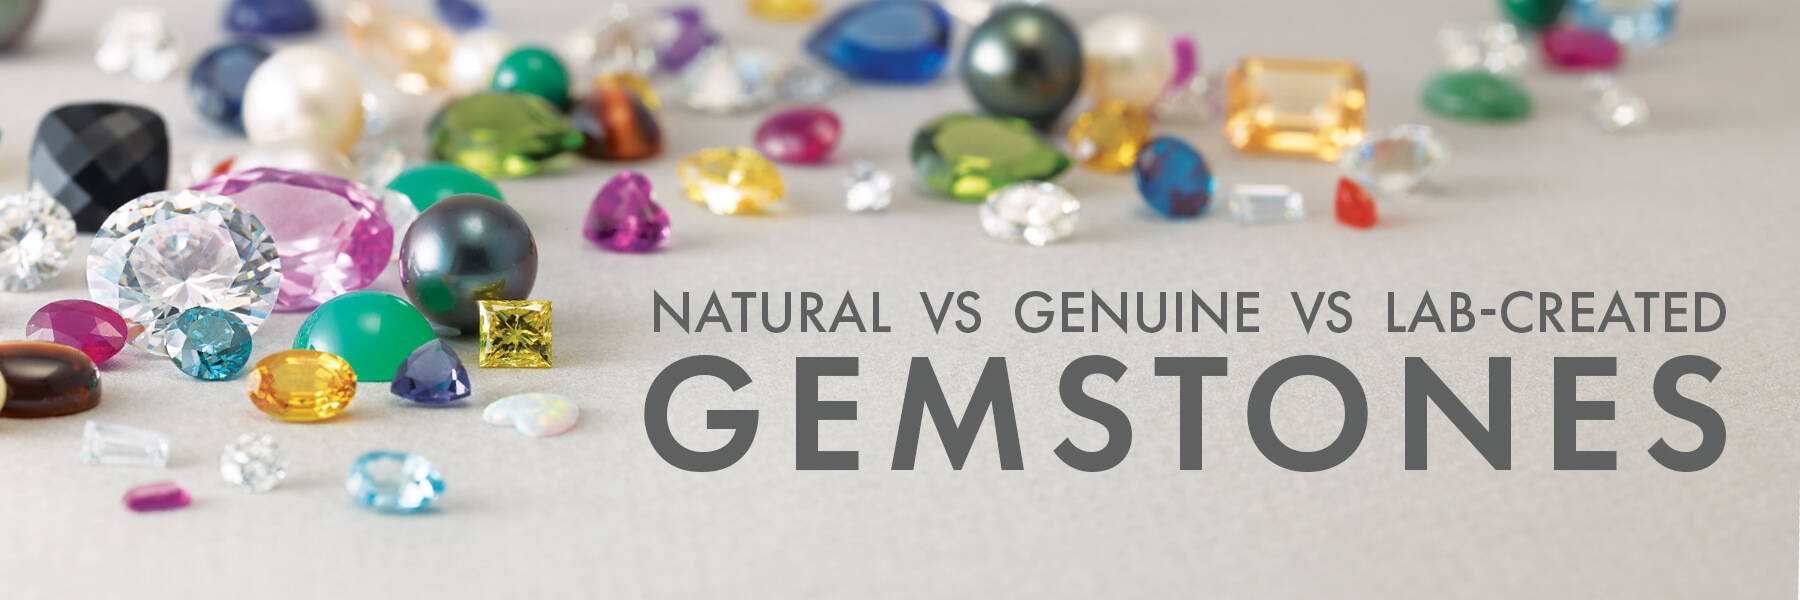 Natural vs Genuine vs Lab-Created Gemstones: What’s the Difference?